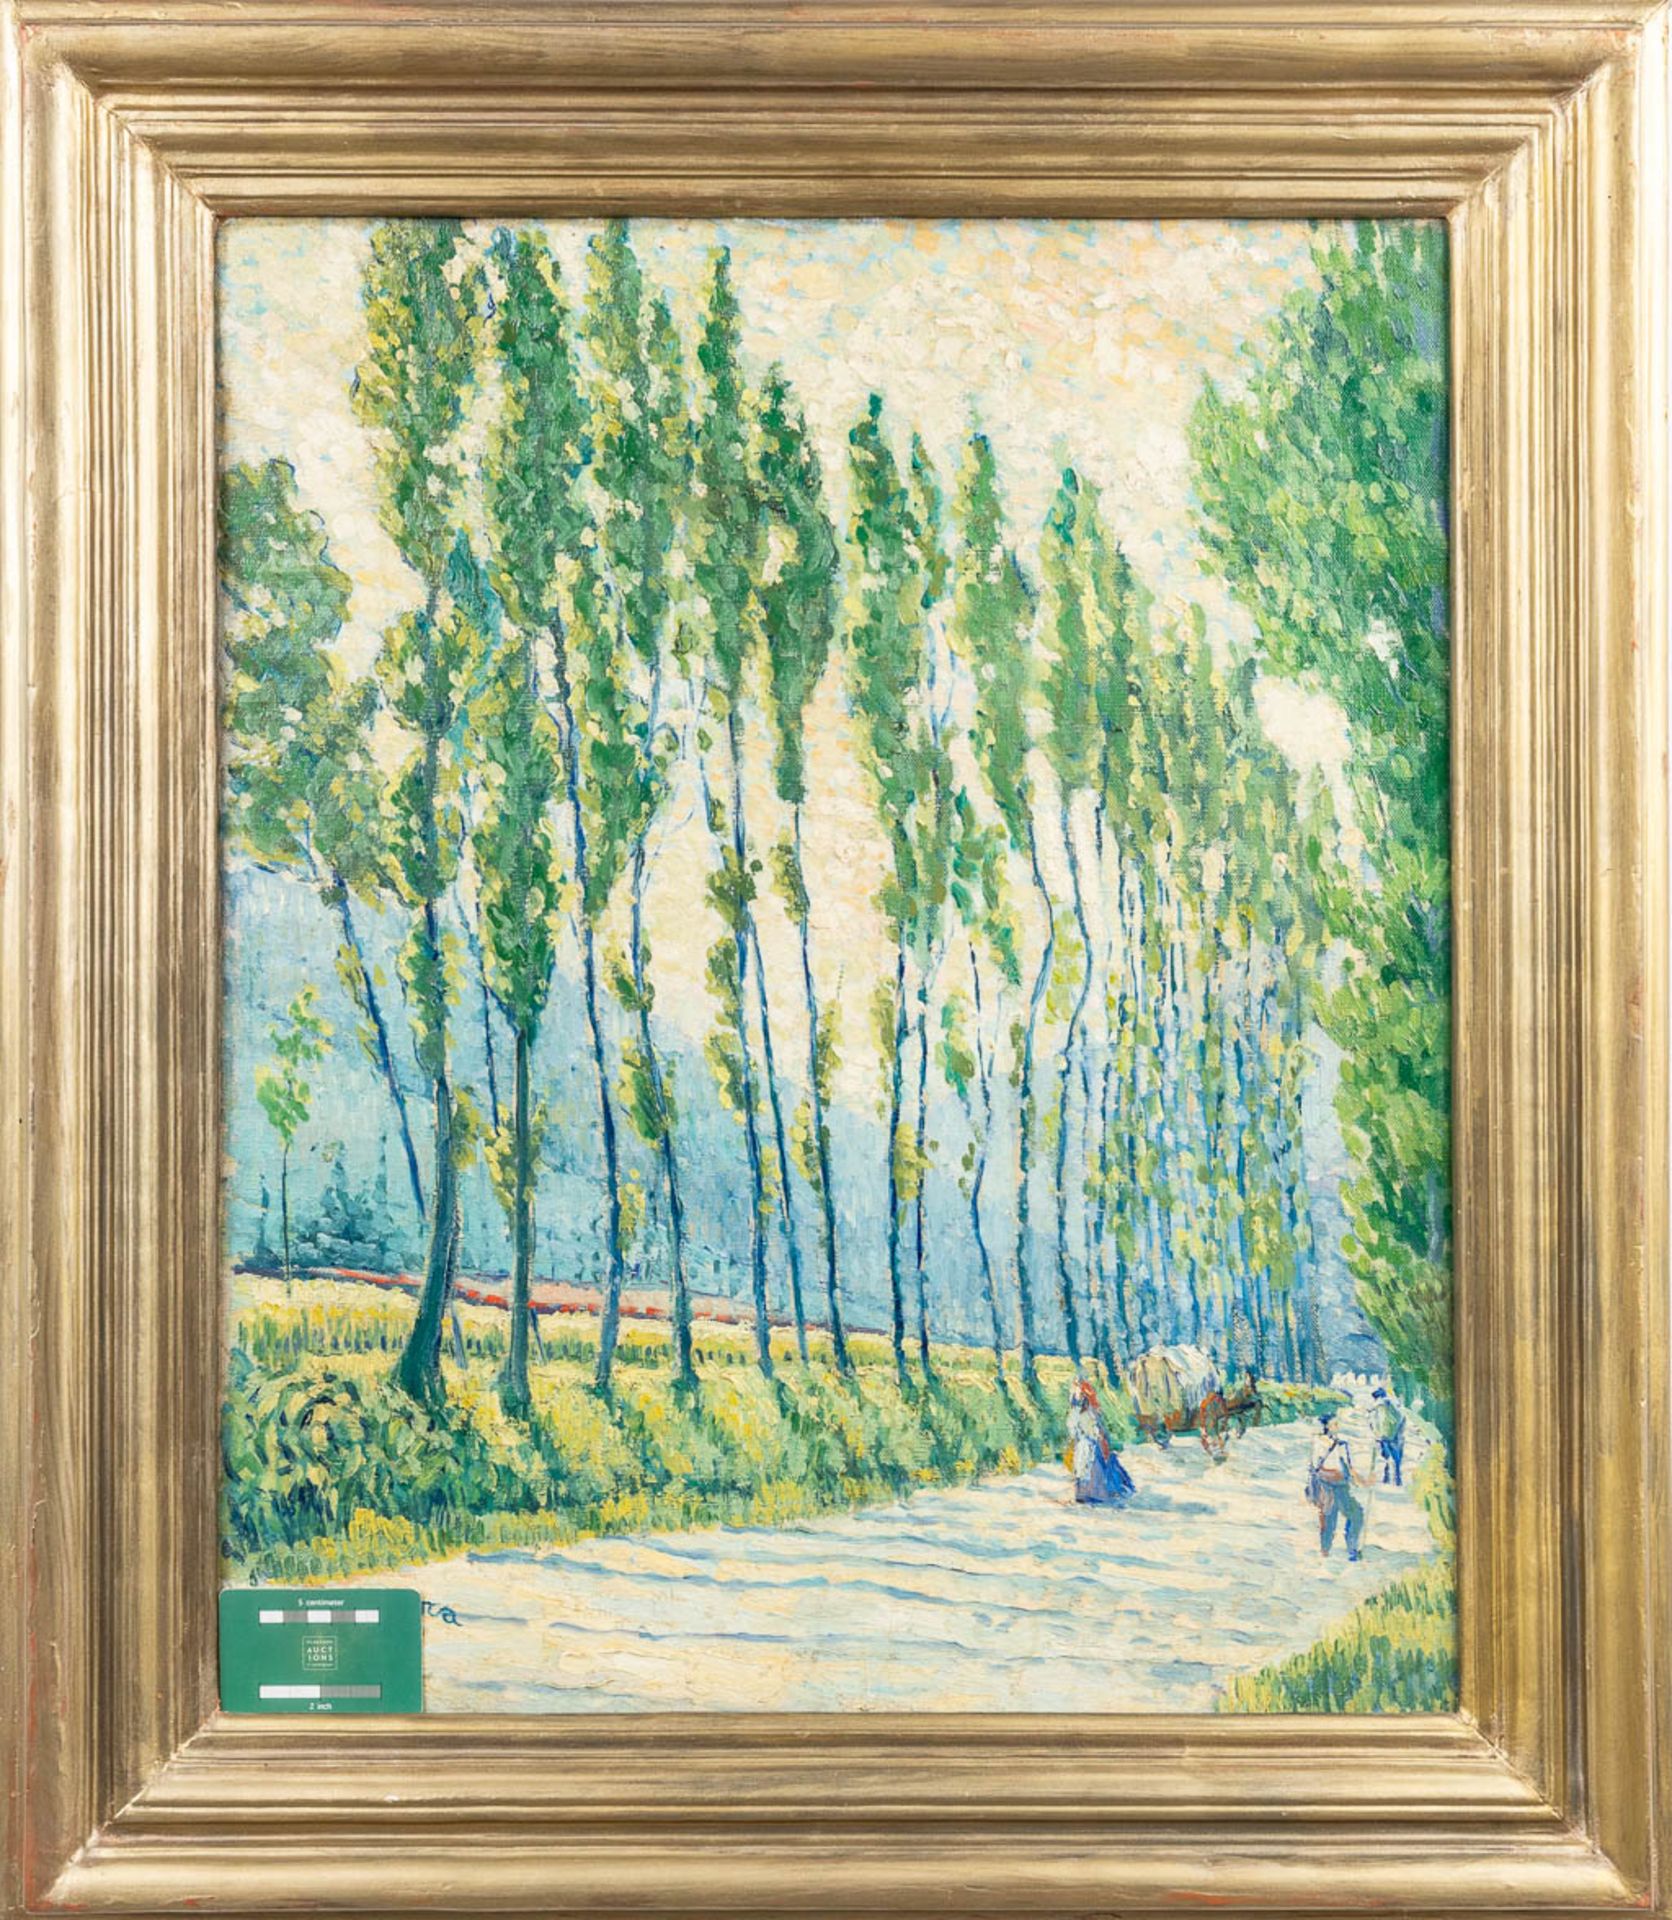 'A view in the park' a painting, oil on canvas. (W:51 x H:63 cm) - Image 2 of 7